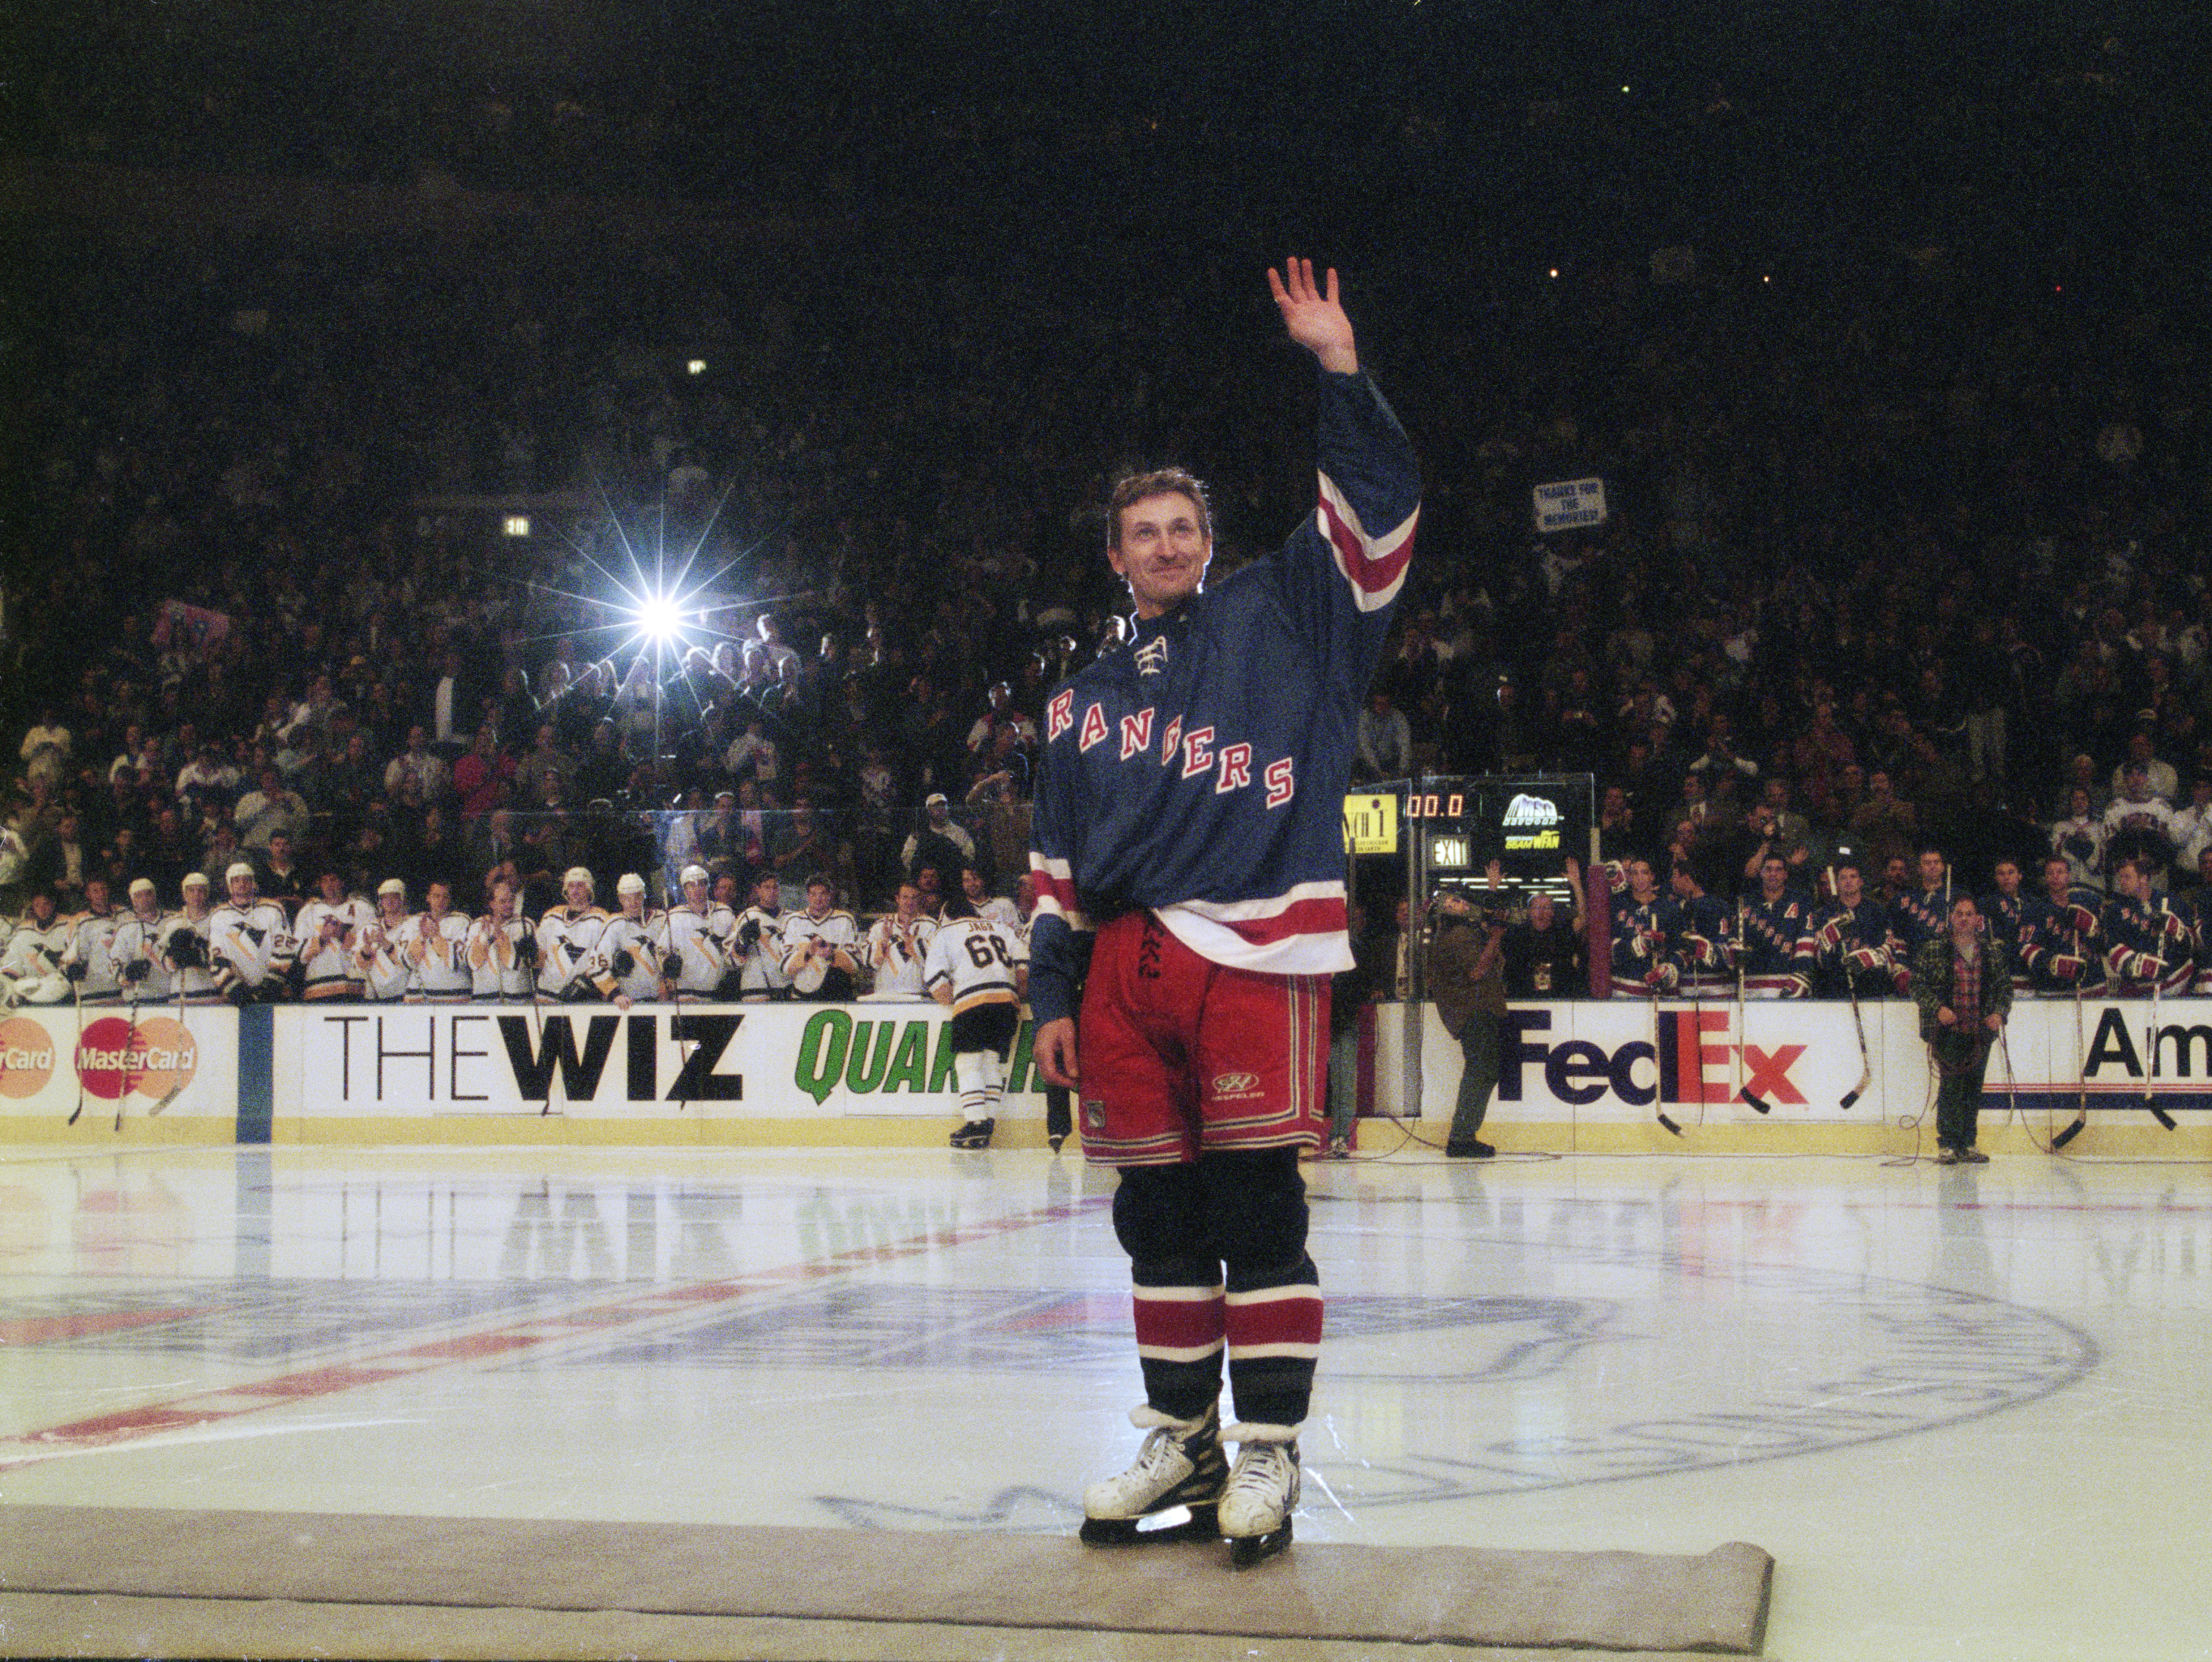 Look back at 'The Great One' Wayne Gretzky's final NHL game – New